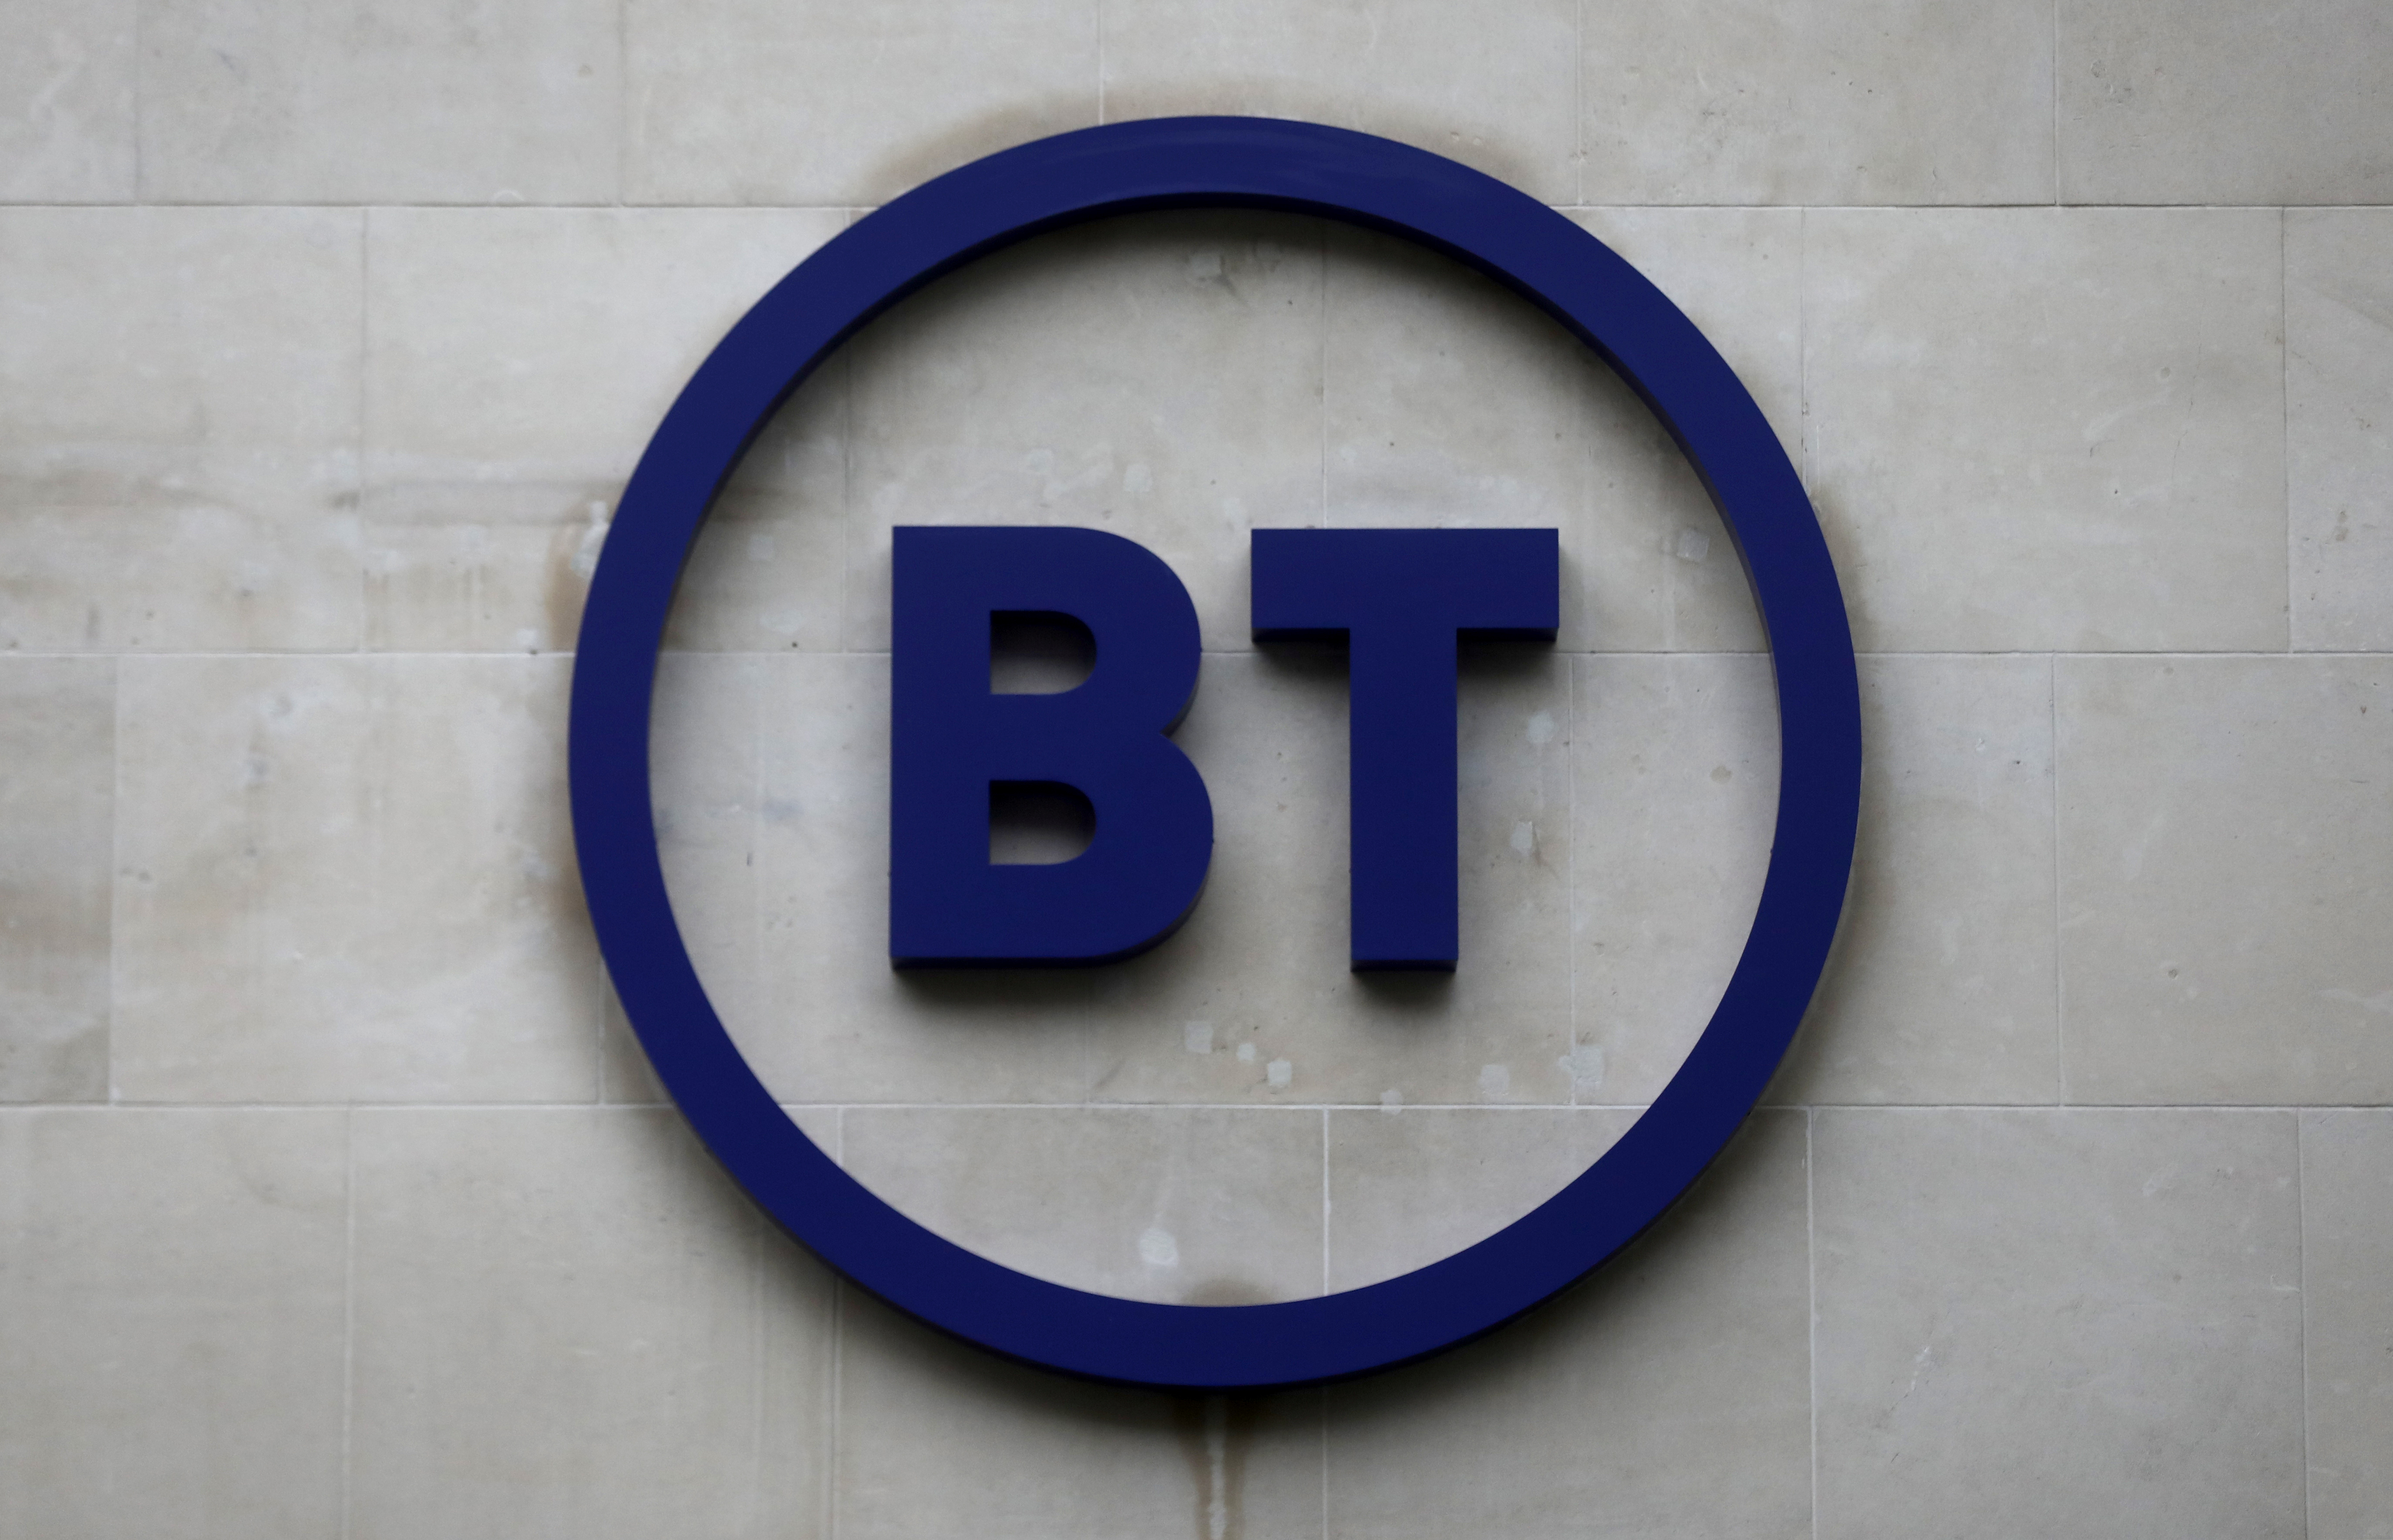 Company's logo is displayed at British Telecom (BT) headquarters in London